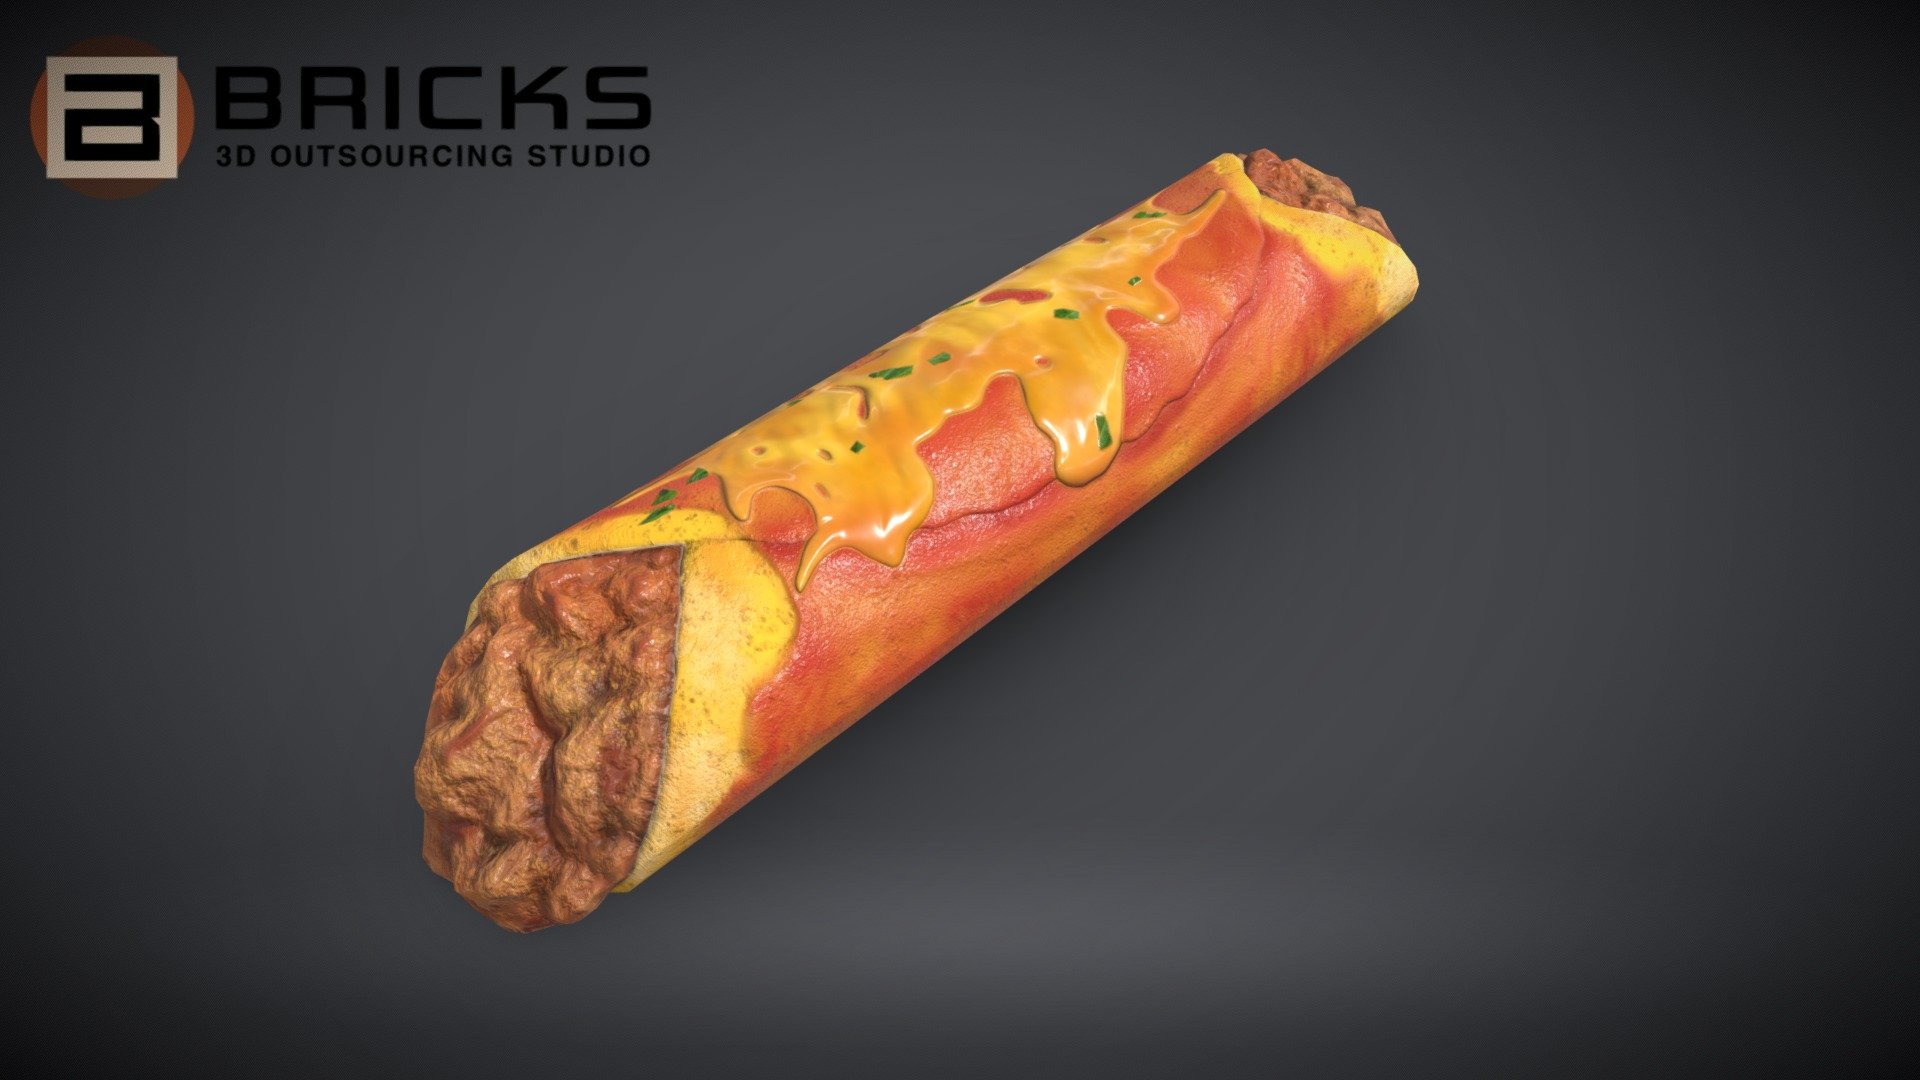 PBR Food Asset:
Beef Enchilada
Polycount: 1064
Vertex count: 600
Texture Size: 2048px x 2048px
Normal: OpenGL

If you need any adjust in file please contact us: team@bricks3dstudio.com

Hire us: tringuyen@bricks3dstudio.com
Here is us: https://www.bricks3dstudio.com/
        https://www.artstation.com/bricksstudio
        https://www.facebook.com/Bricks3dstudio/
        https://www.linkedin.com/in/bricks-studio-b10462252/ - Beef Enchilada - Buy Royalty Free 3D model by Bricks Studio (@bricks3dstudio) 3d model